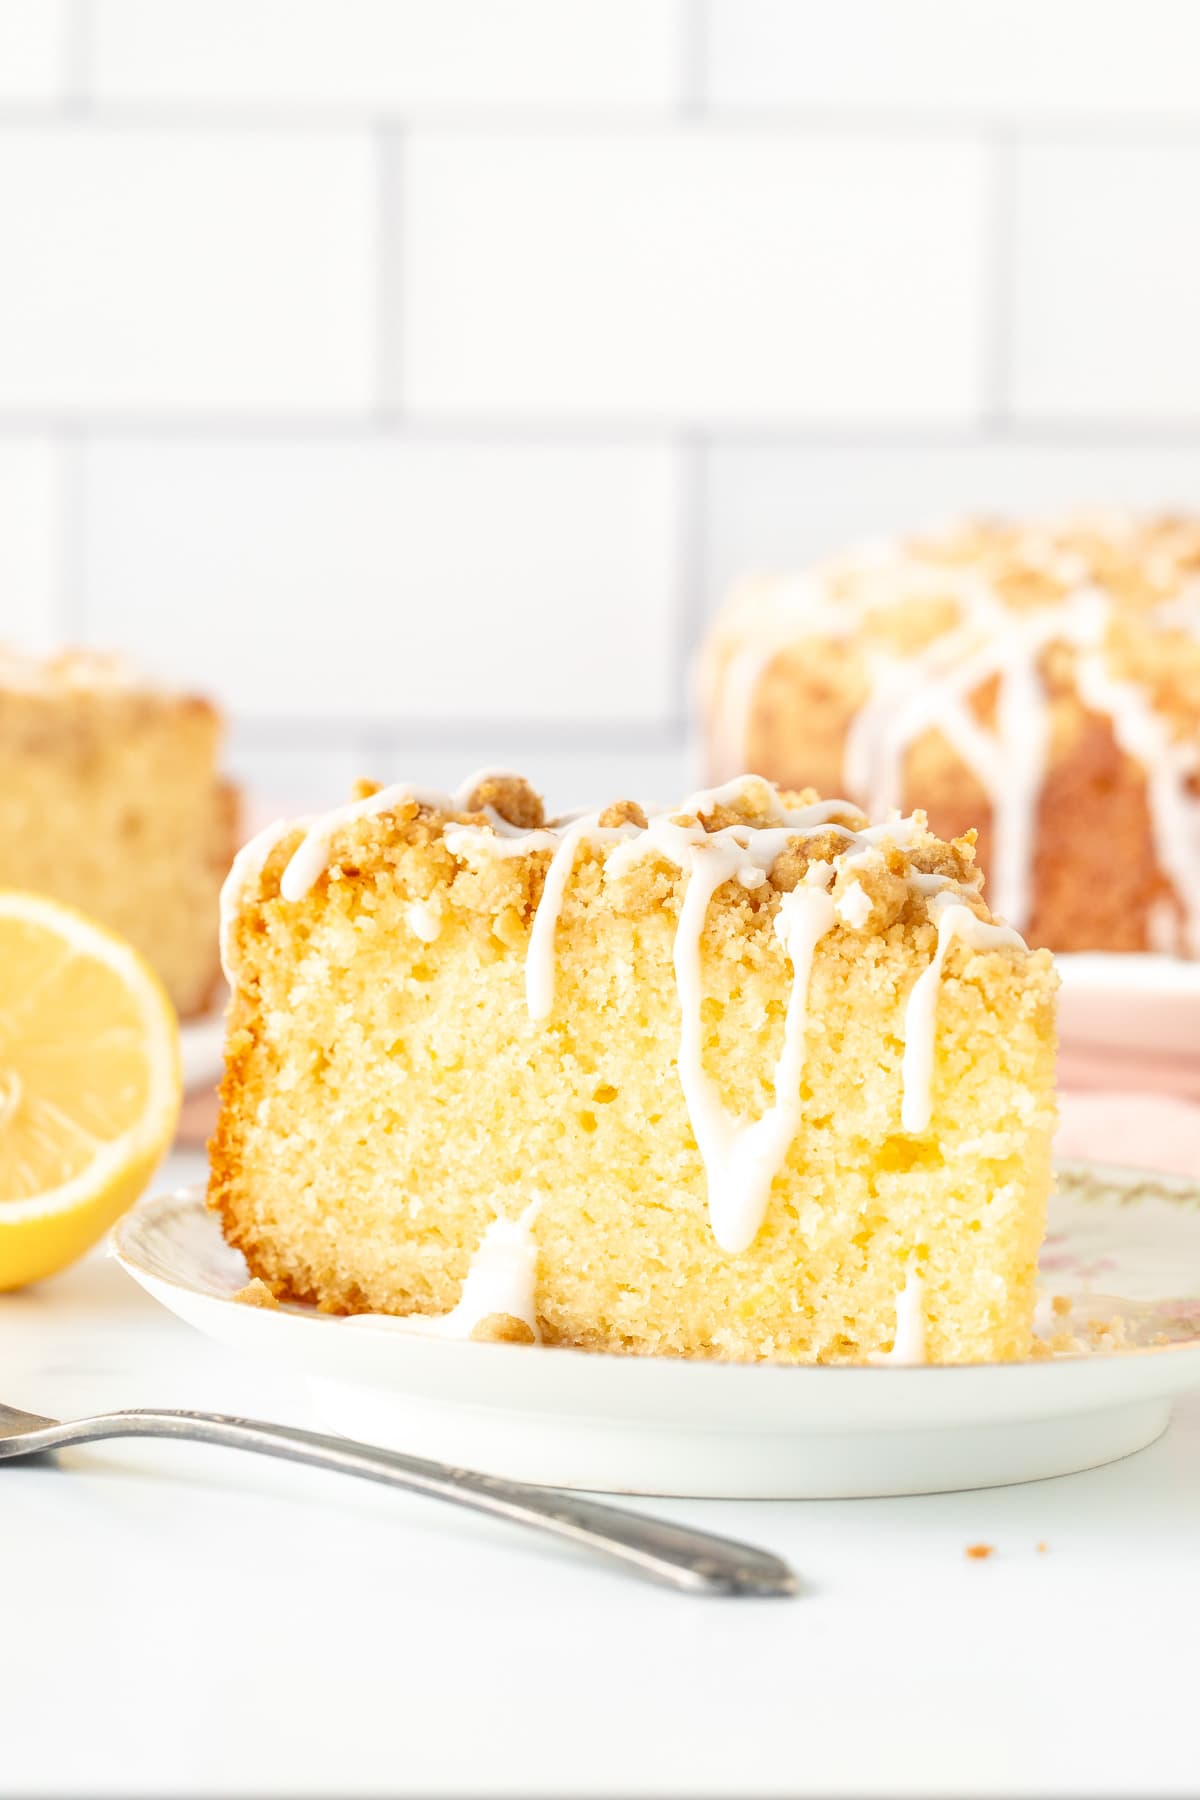 Slice of lemon coffee cake with crumb topping and drizzle of glaze